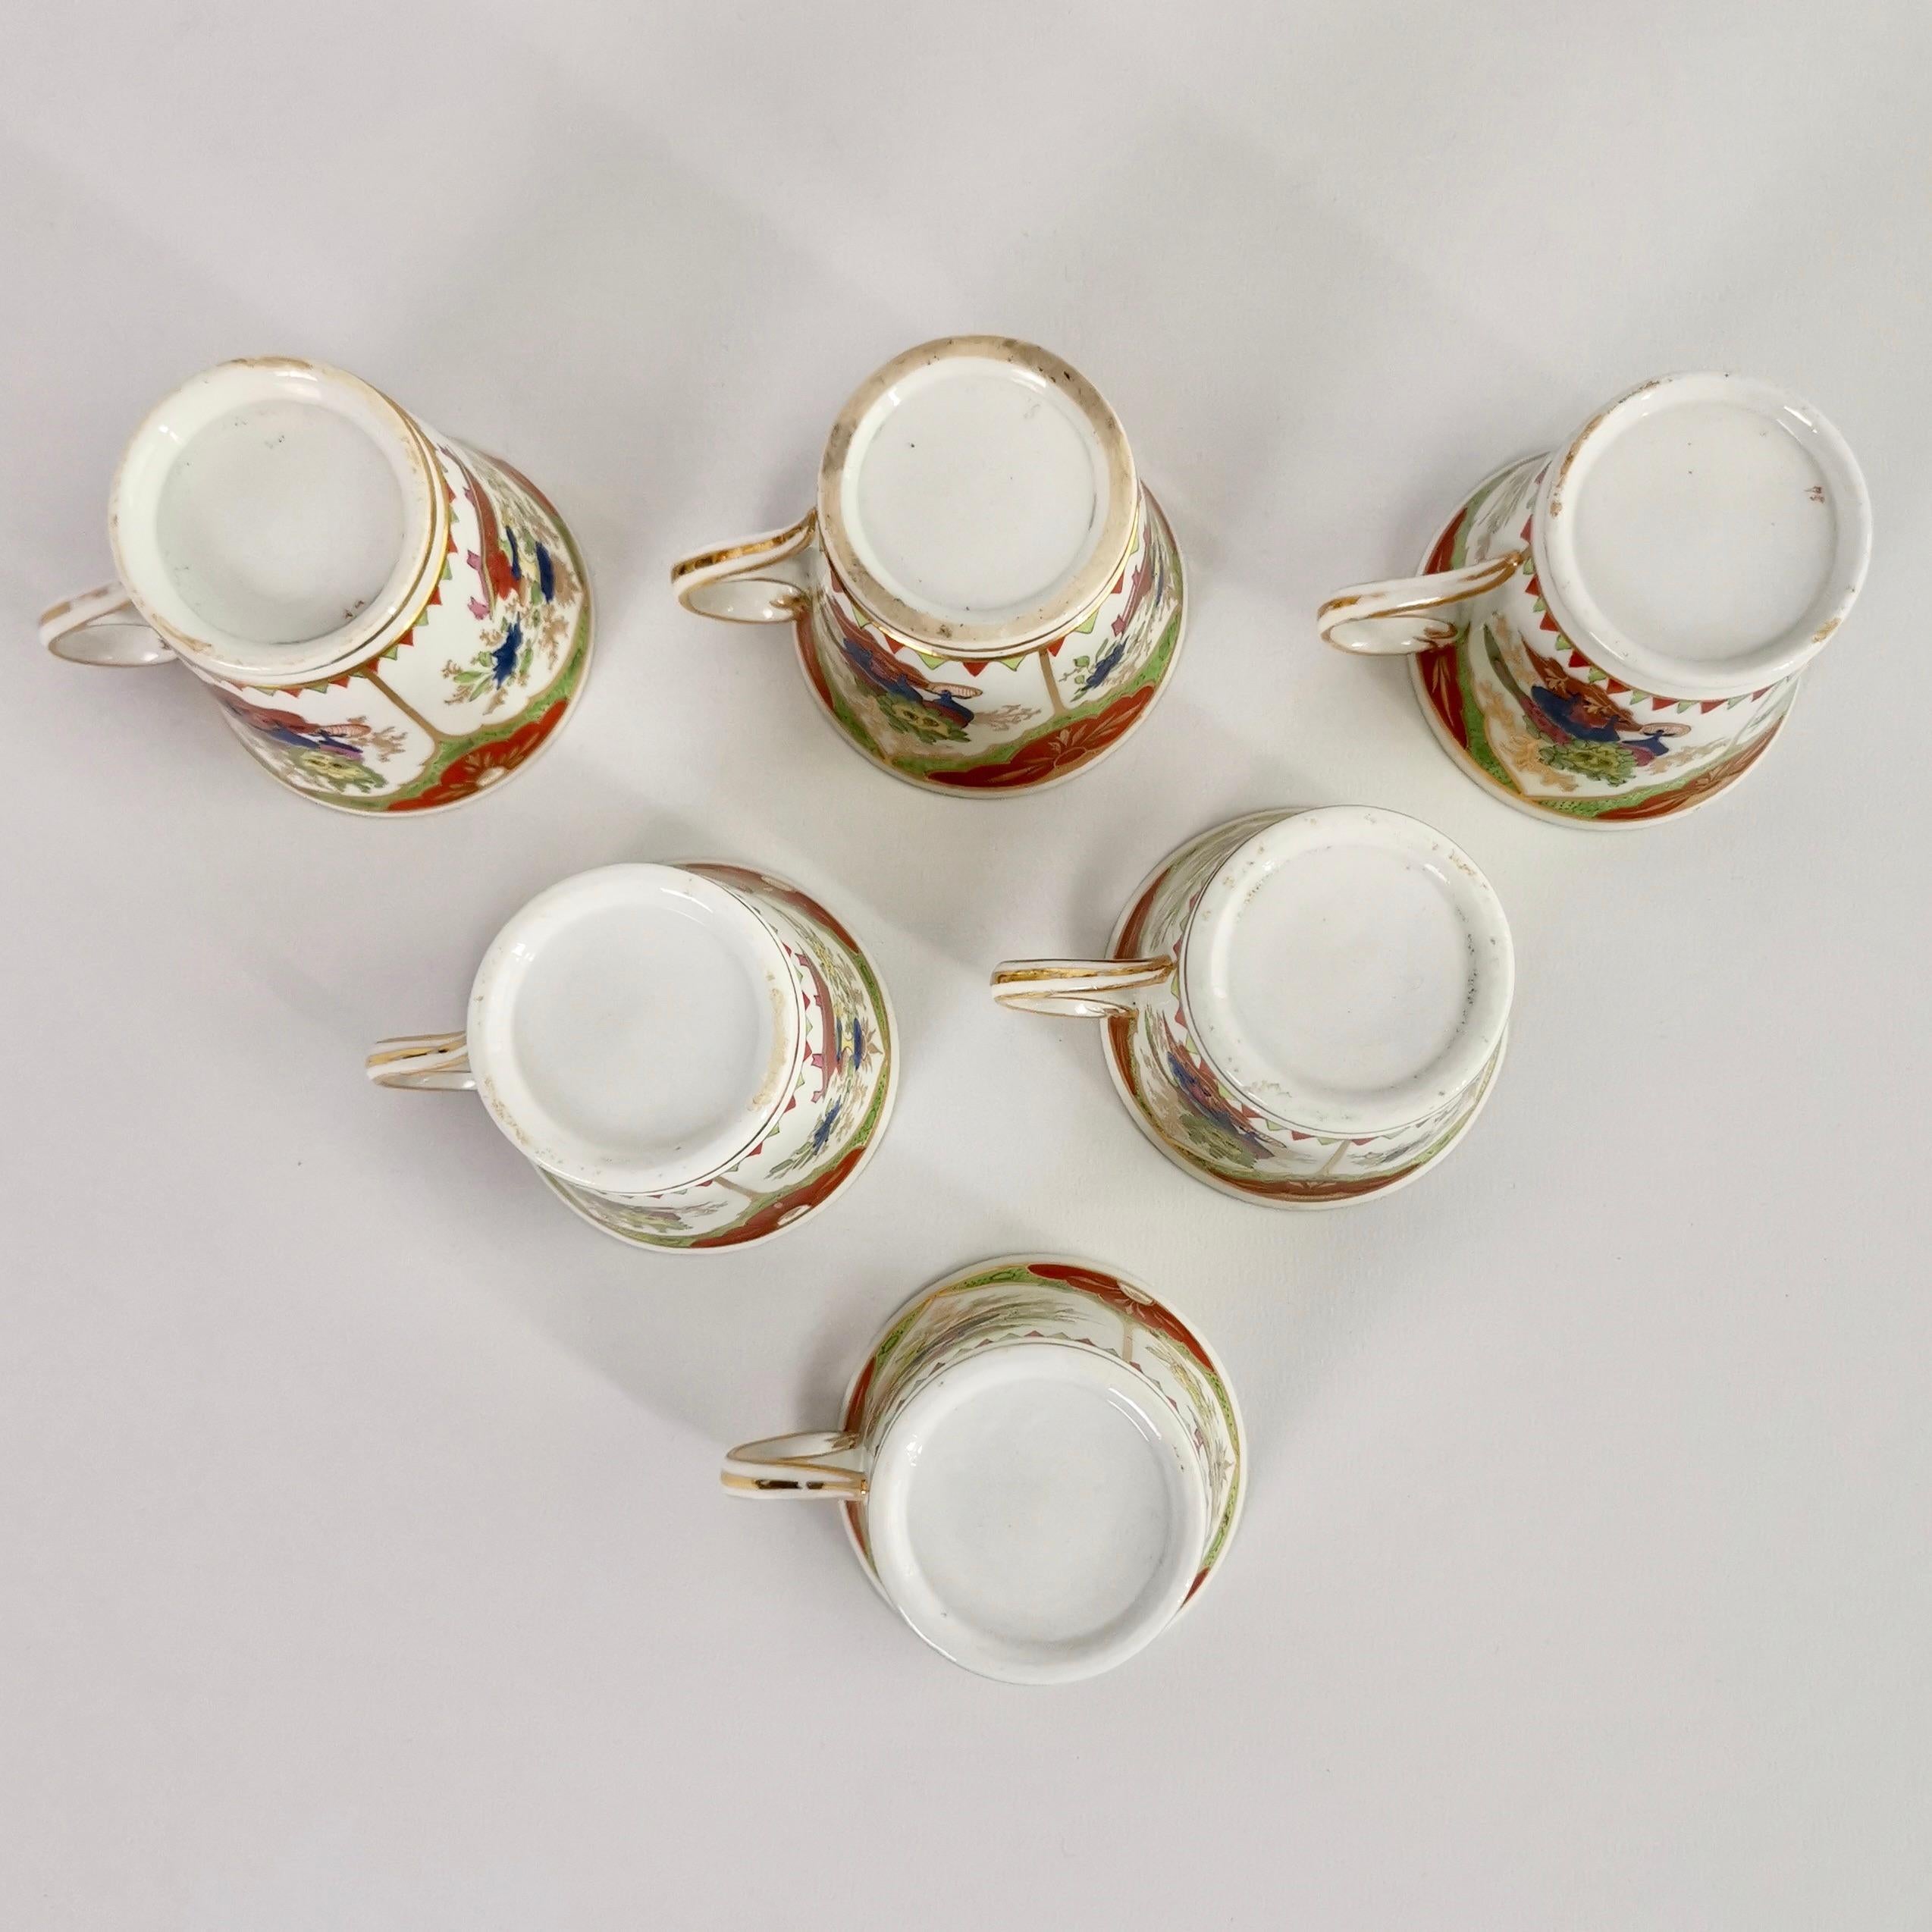 Set of 6 Chamberlain's Worcester Porcelain Coffee Cups, Dragons, circa 1810 6